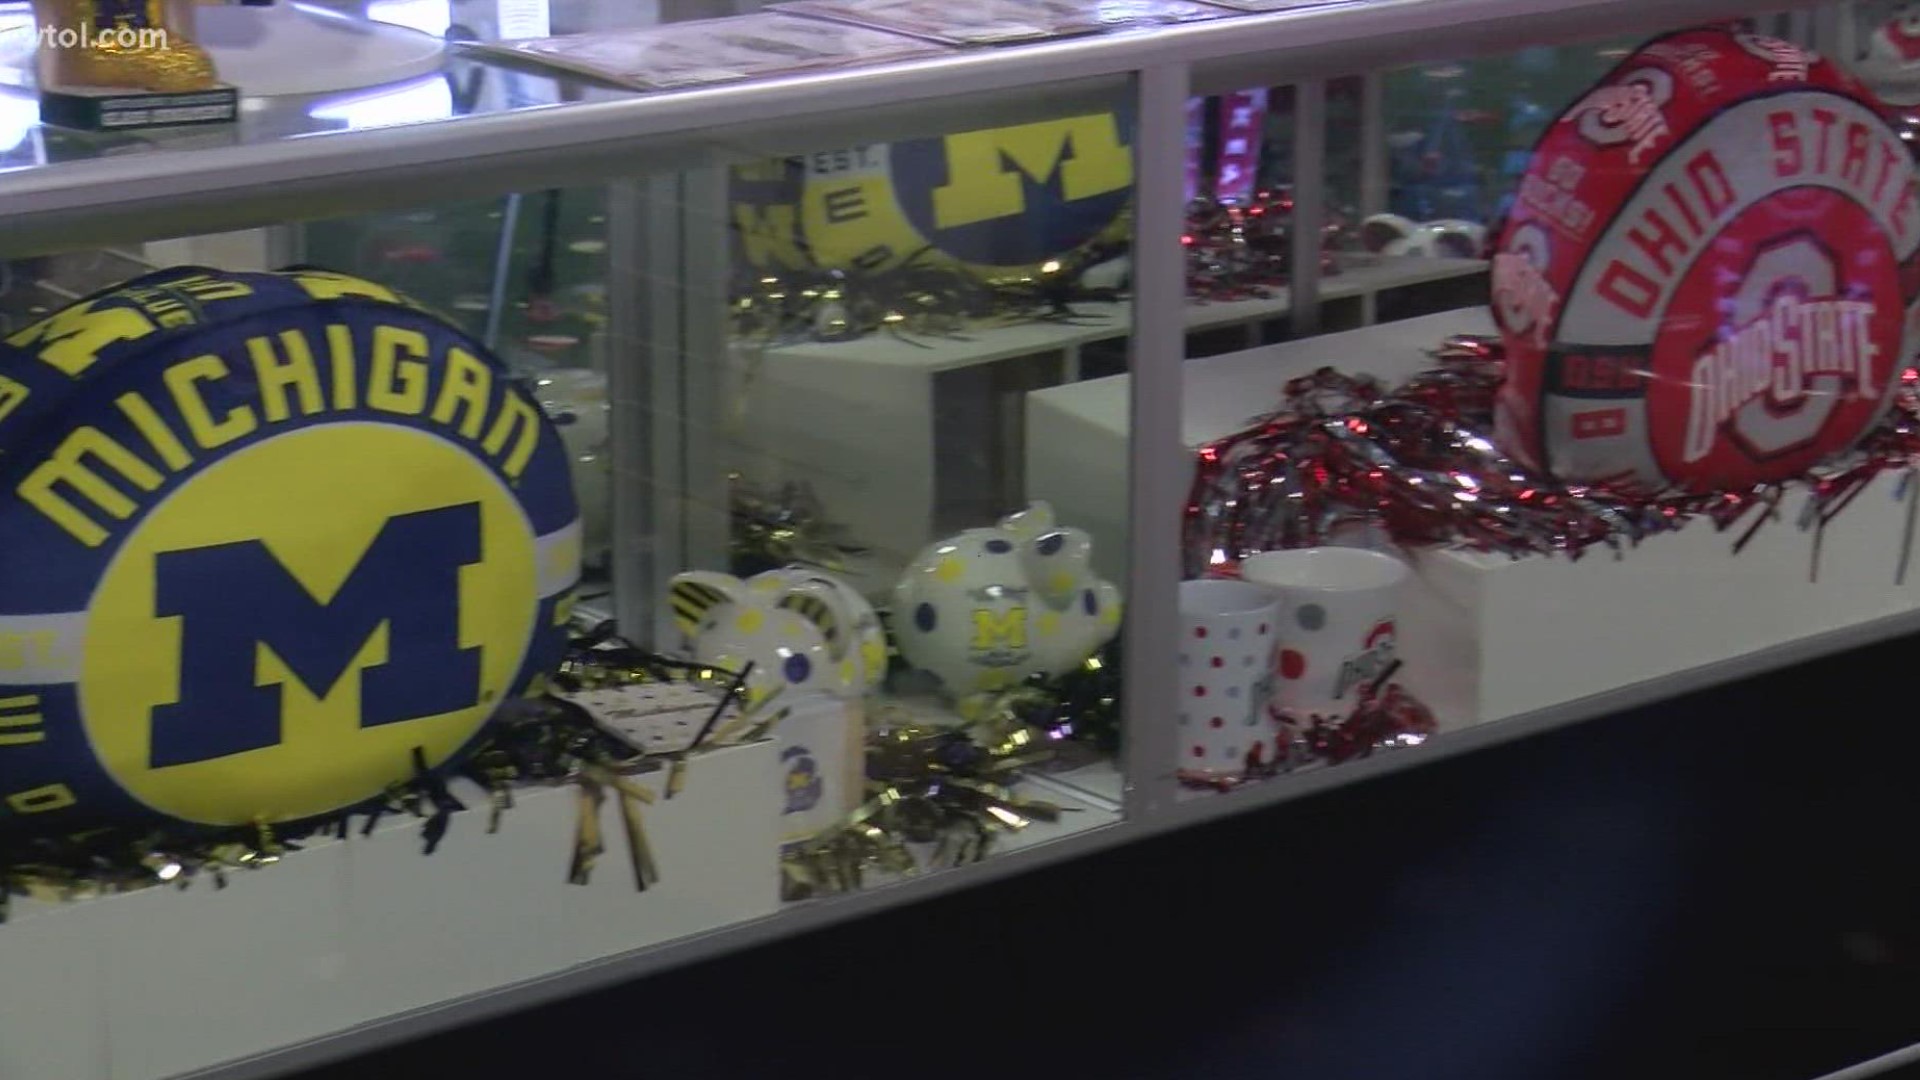 The rivalry game is just a few short days away and fans are getting ready at a local sports shop.